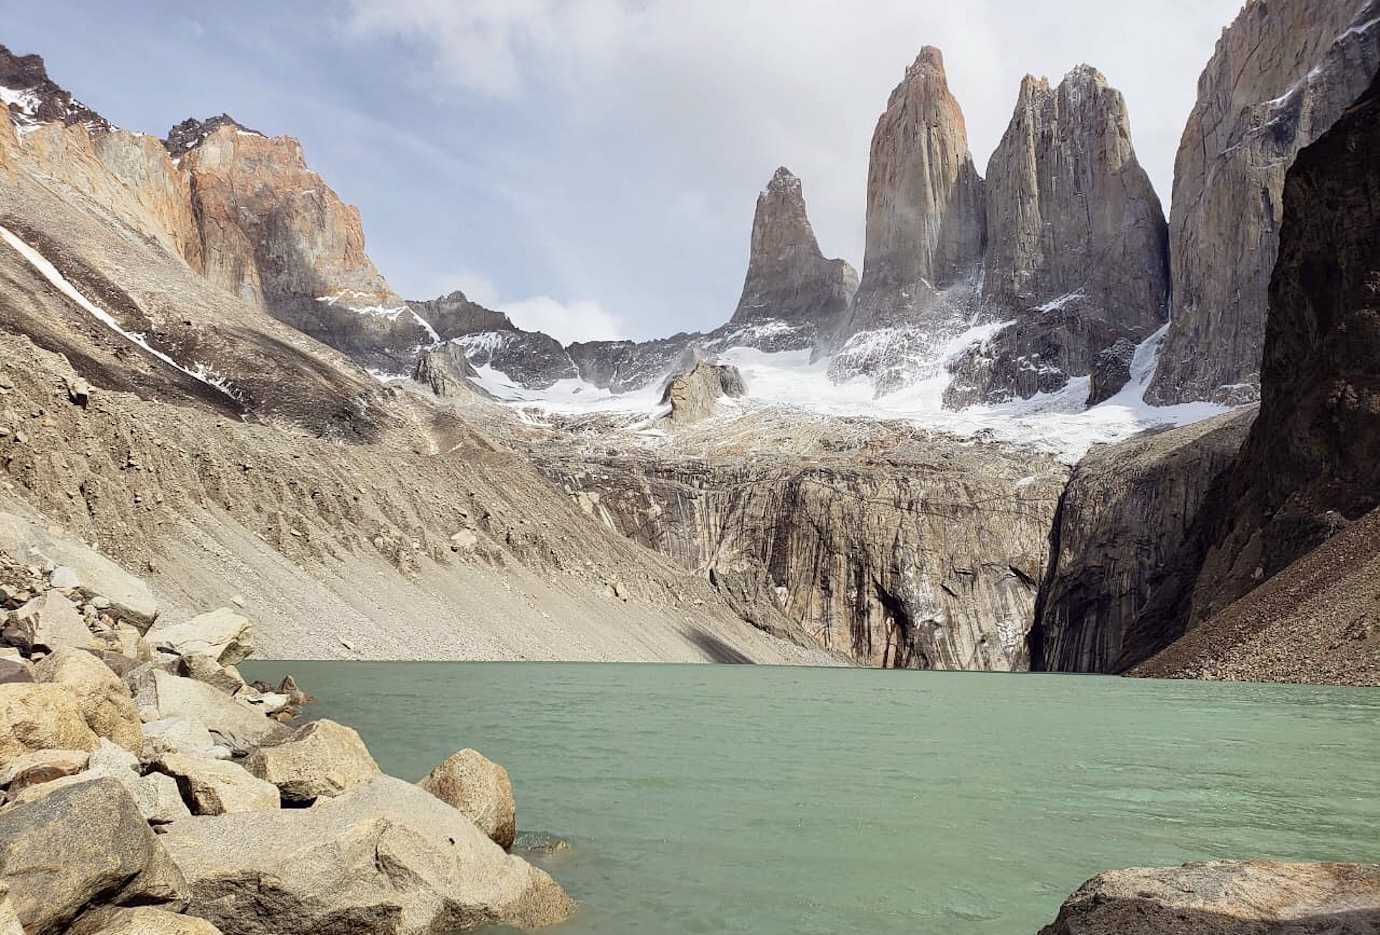 The W trek in Torres del Paine – packing list, costs and tips